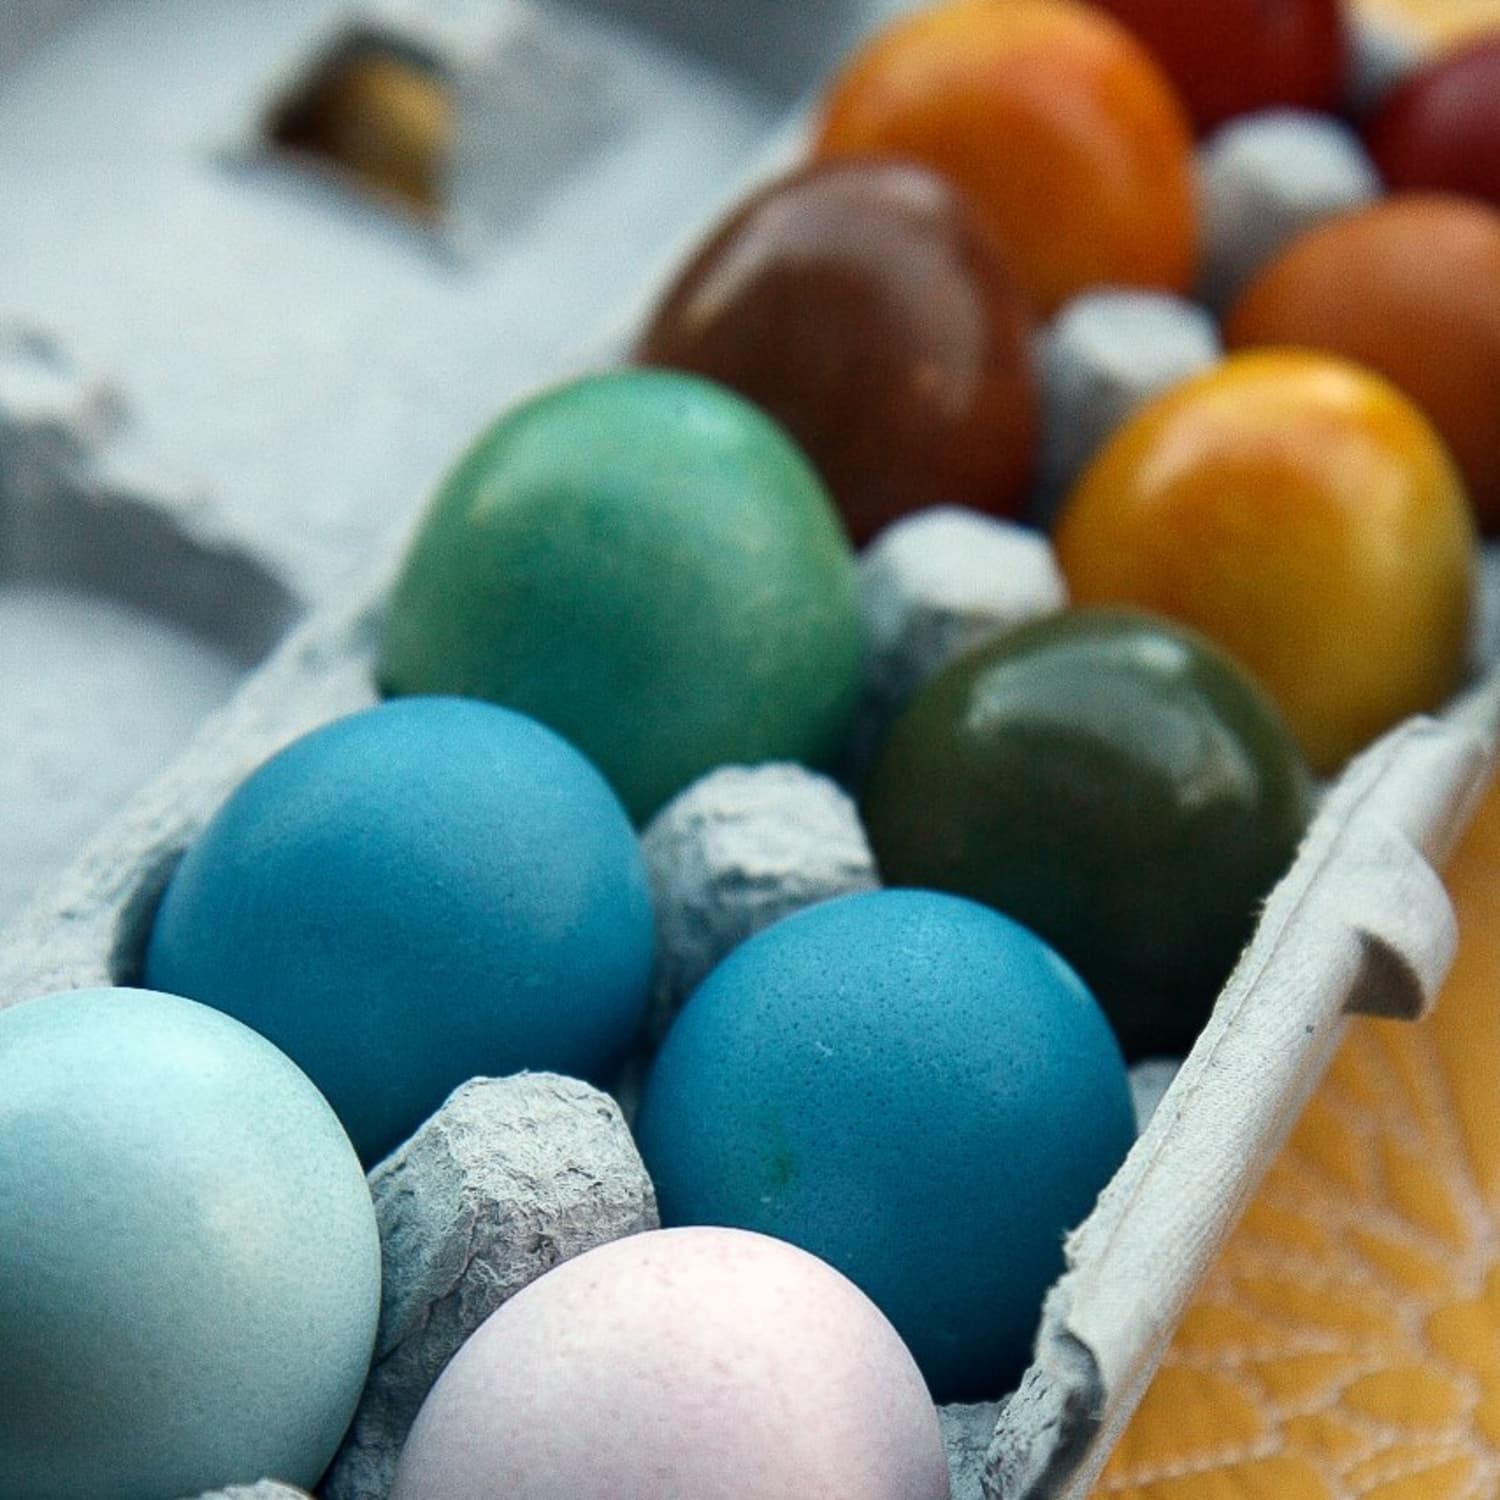 How To Dye Easter Eggs Naturally (Using Beets, Tea & More)